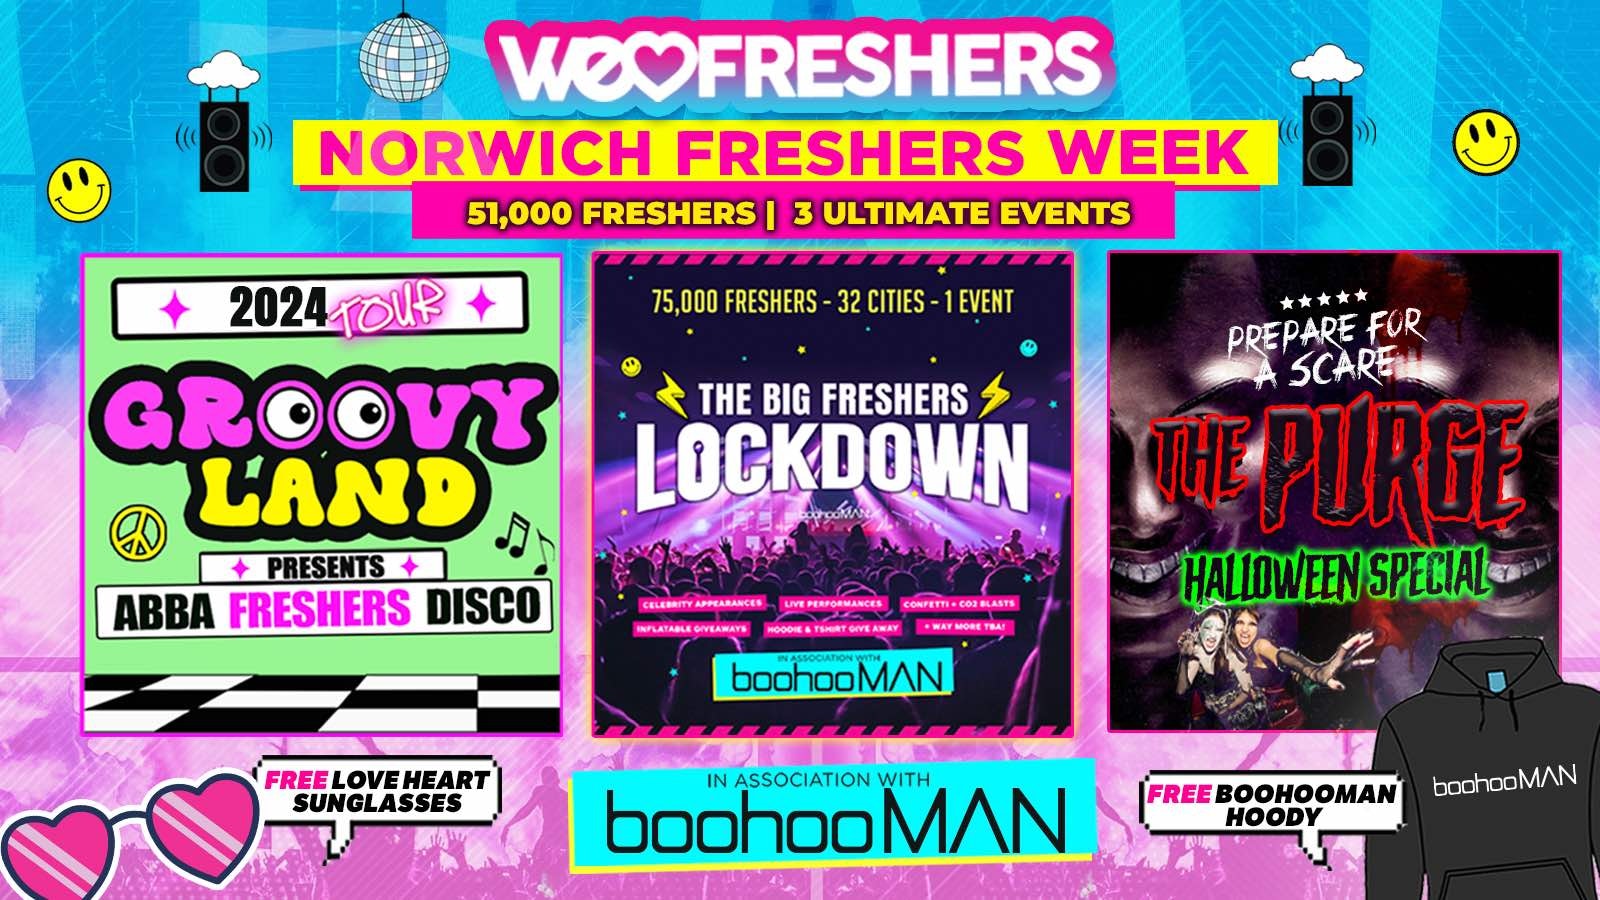 WE LOVE NORWICH FRESHERS 2024 in association with boohooMAN ❗3 EVENTS ❗